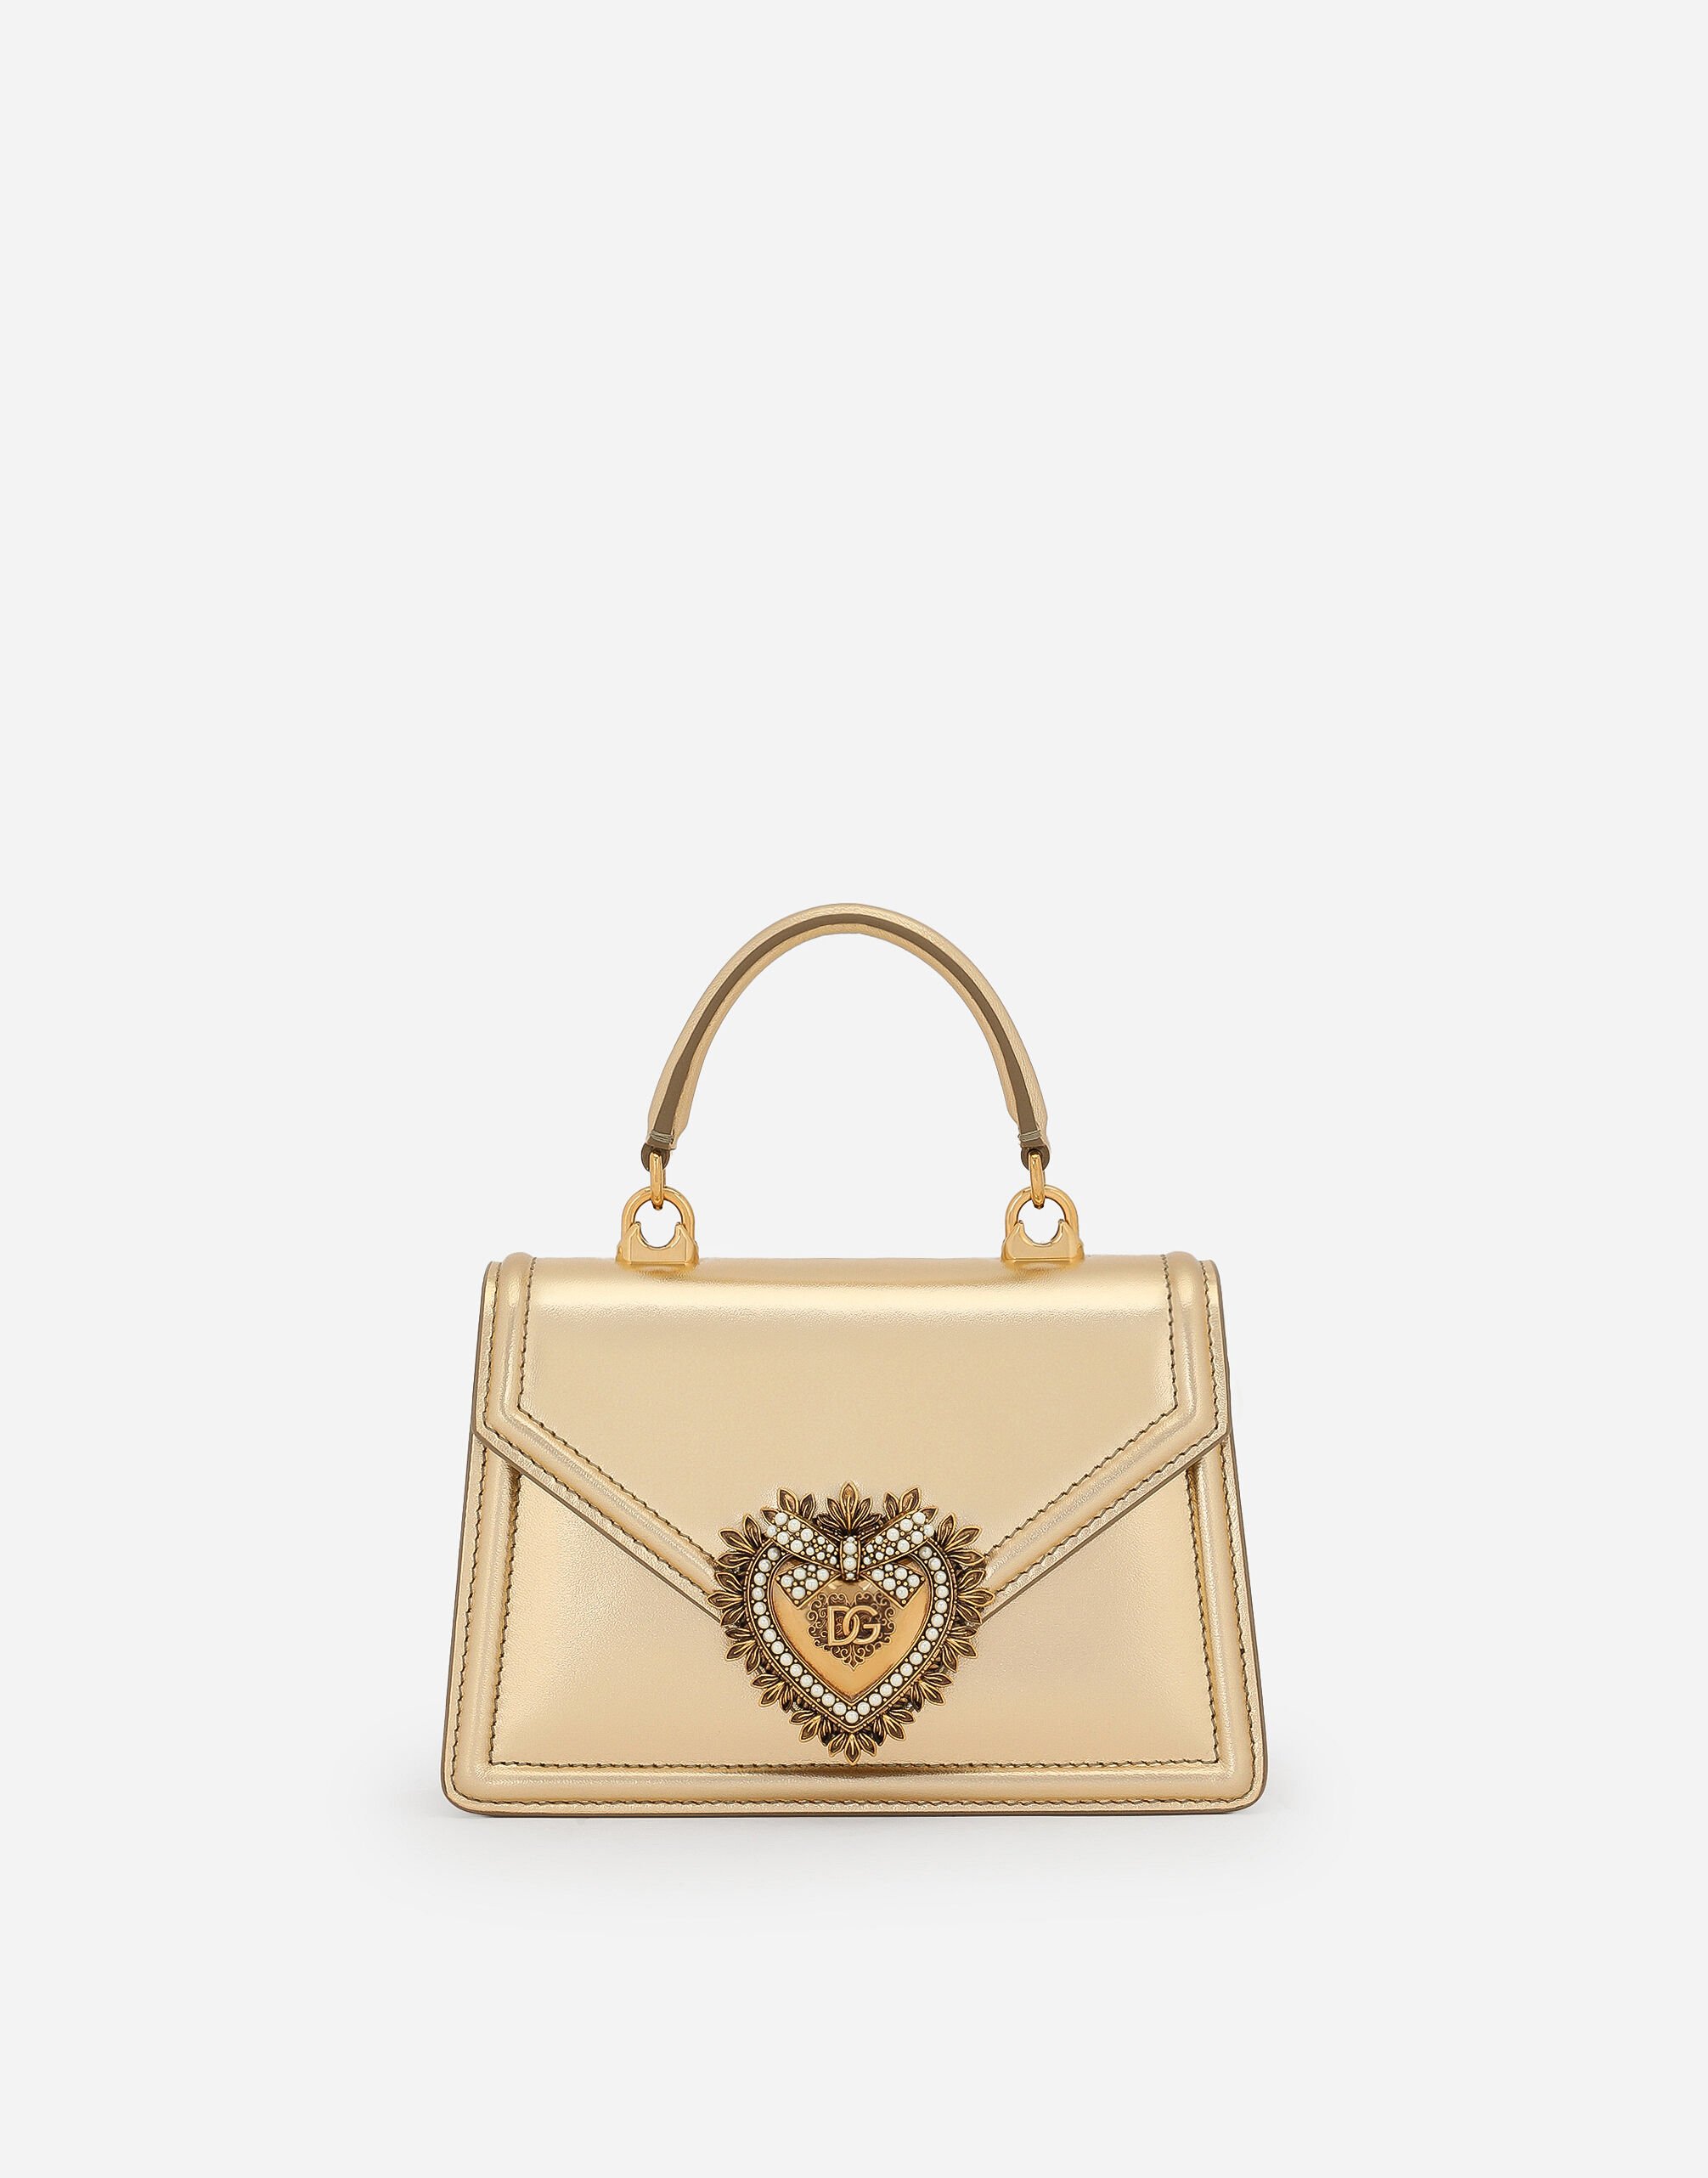 Dolce & Gabbana Small Devotion bag in nappa mordore leather Gold BB7287AY828